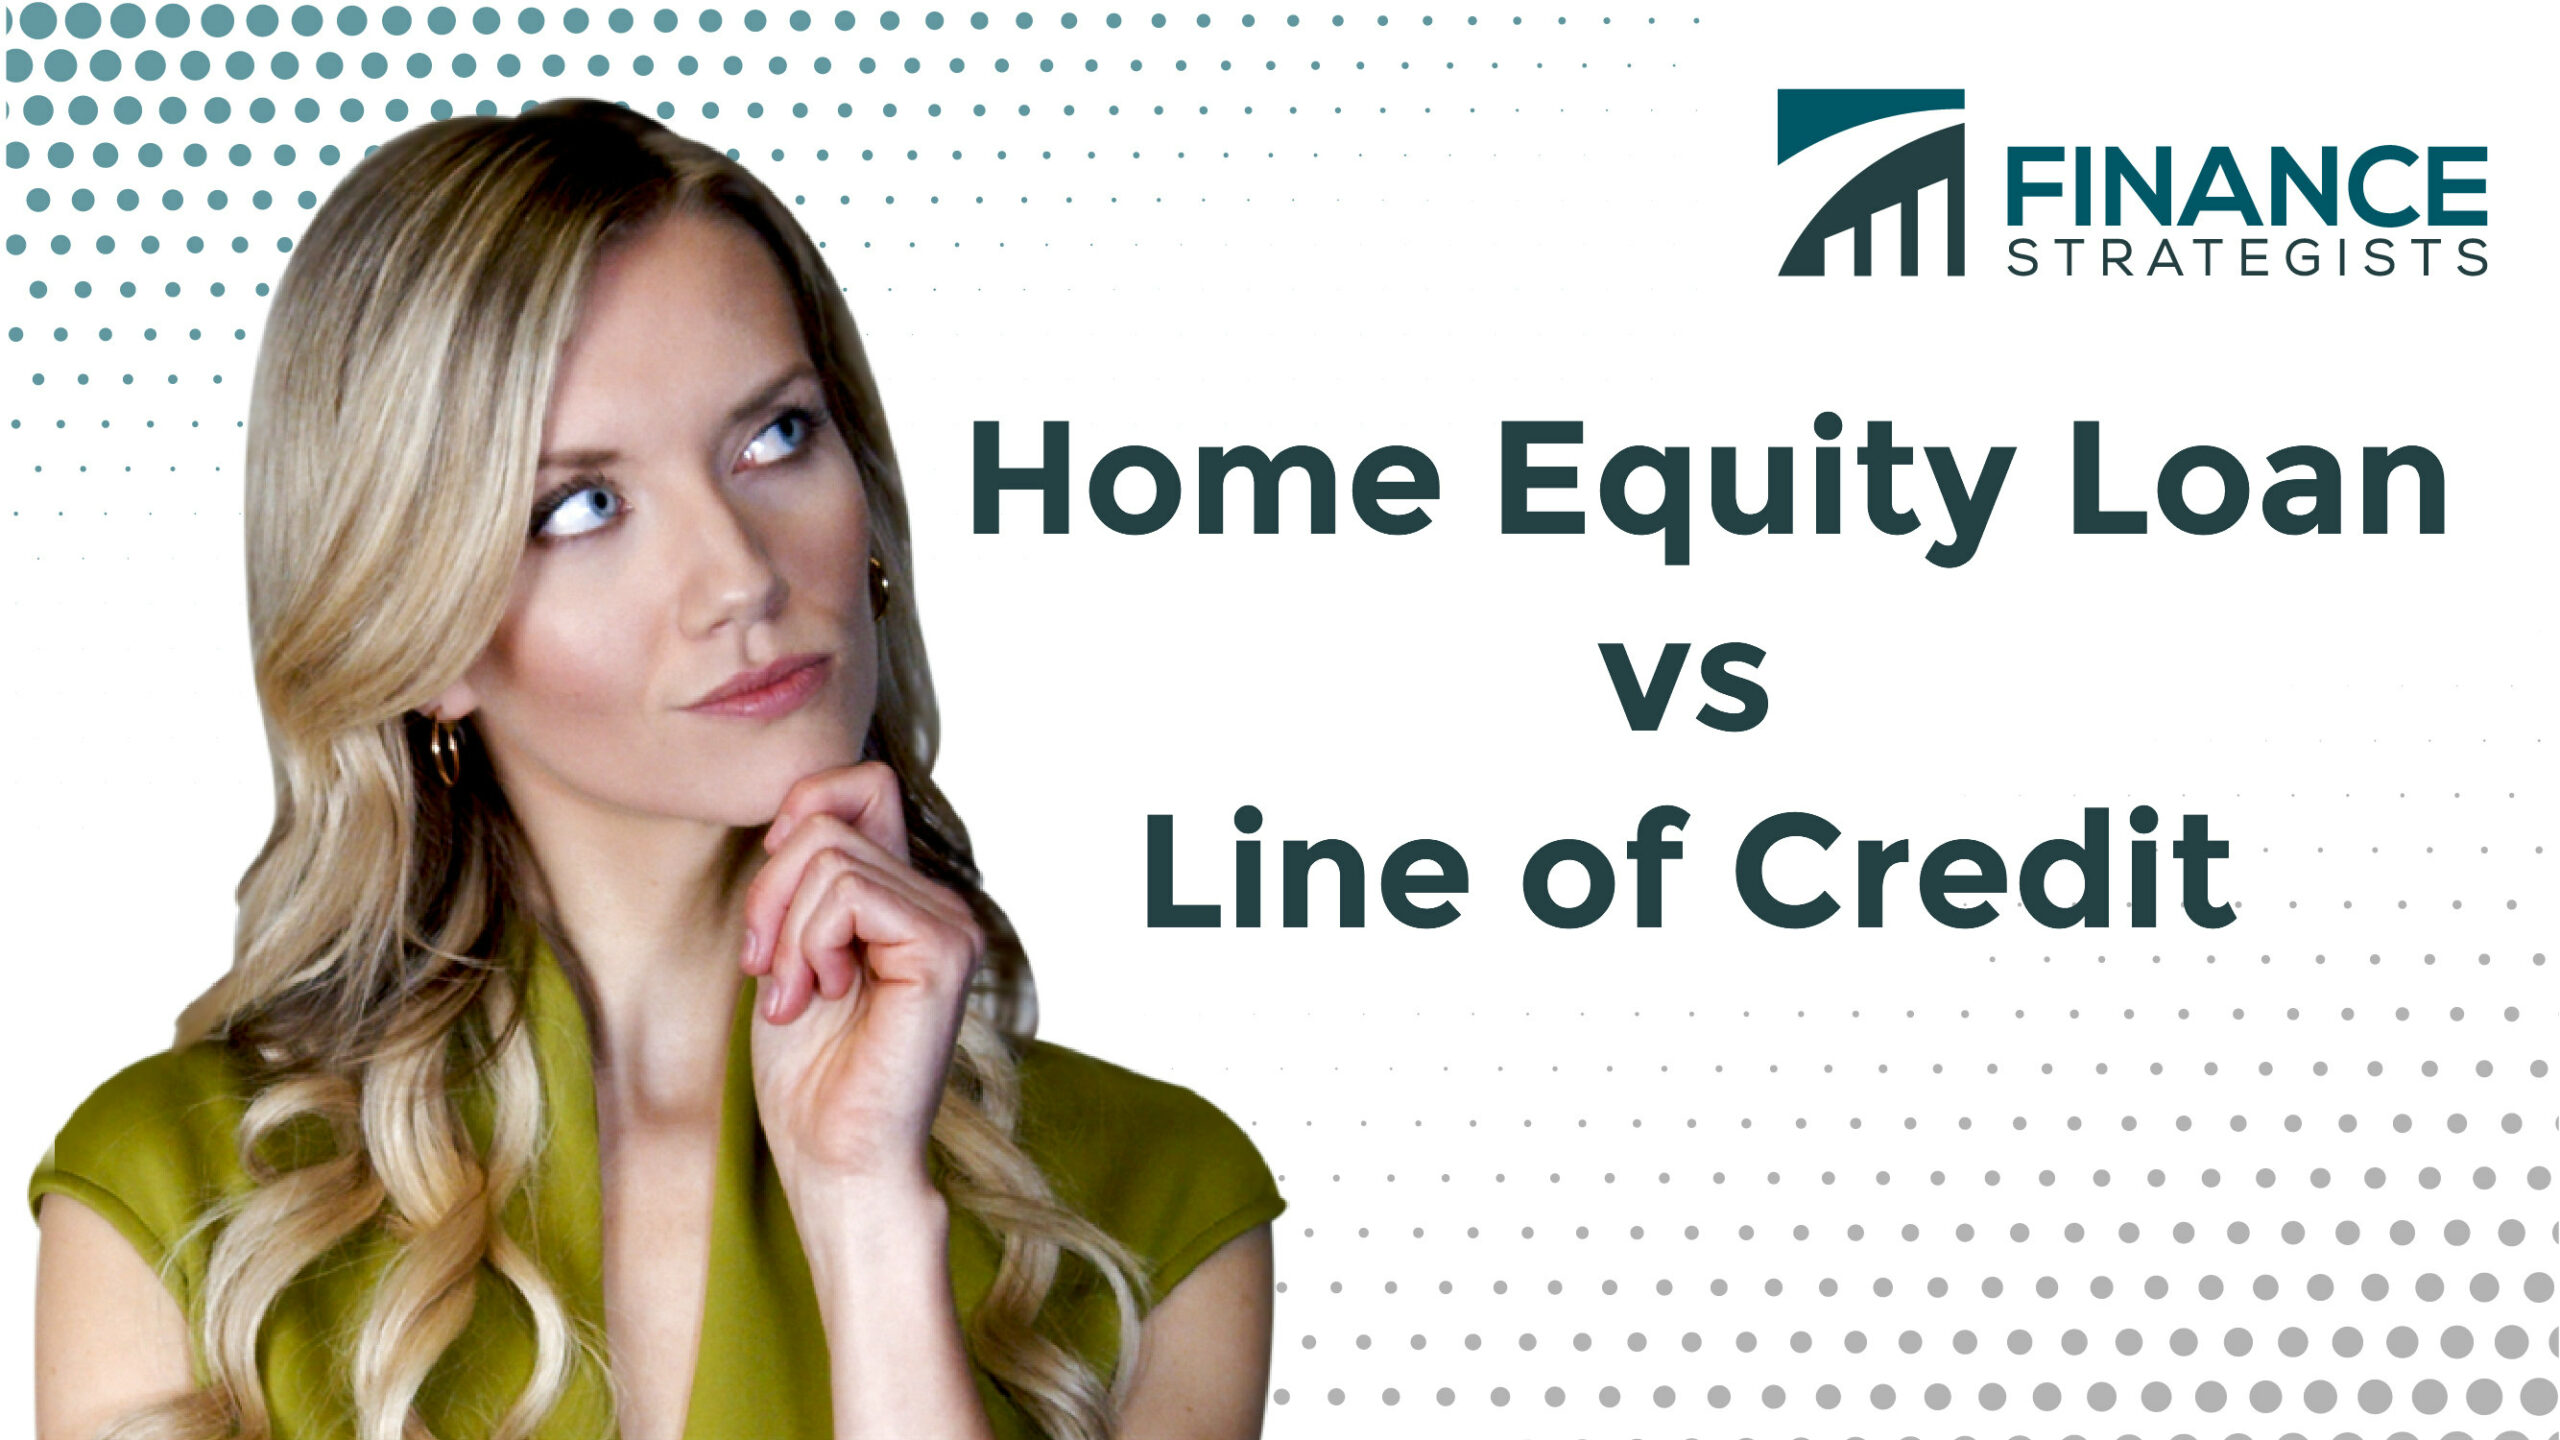 home-equity-loan-vs-line-of-credit-finance-strategists